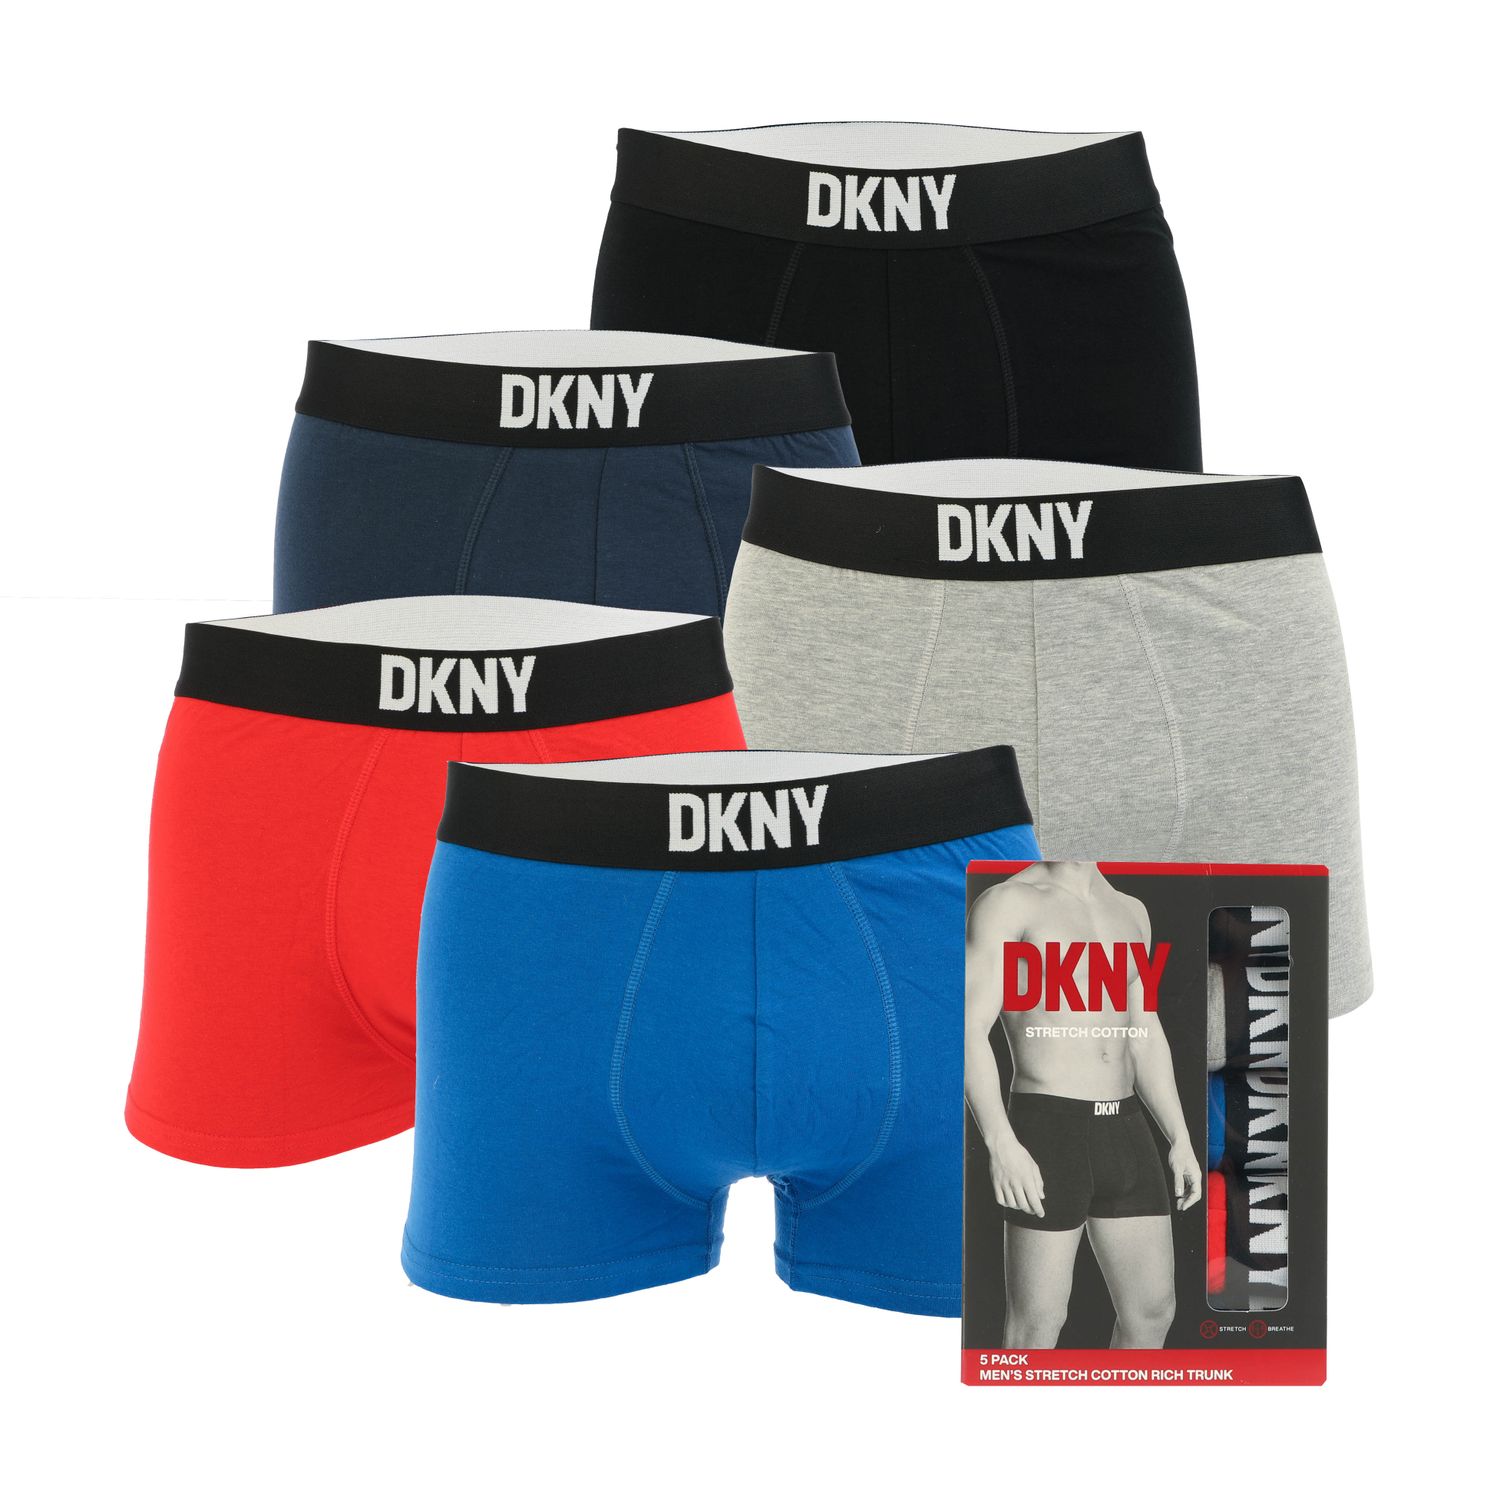 Buy DKNY Mens Portland Five Pack Boxers Black/Grey/Navy/Charcoal/White